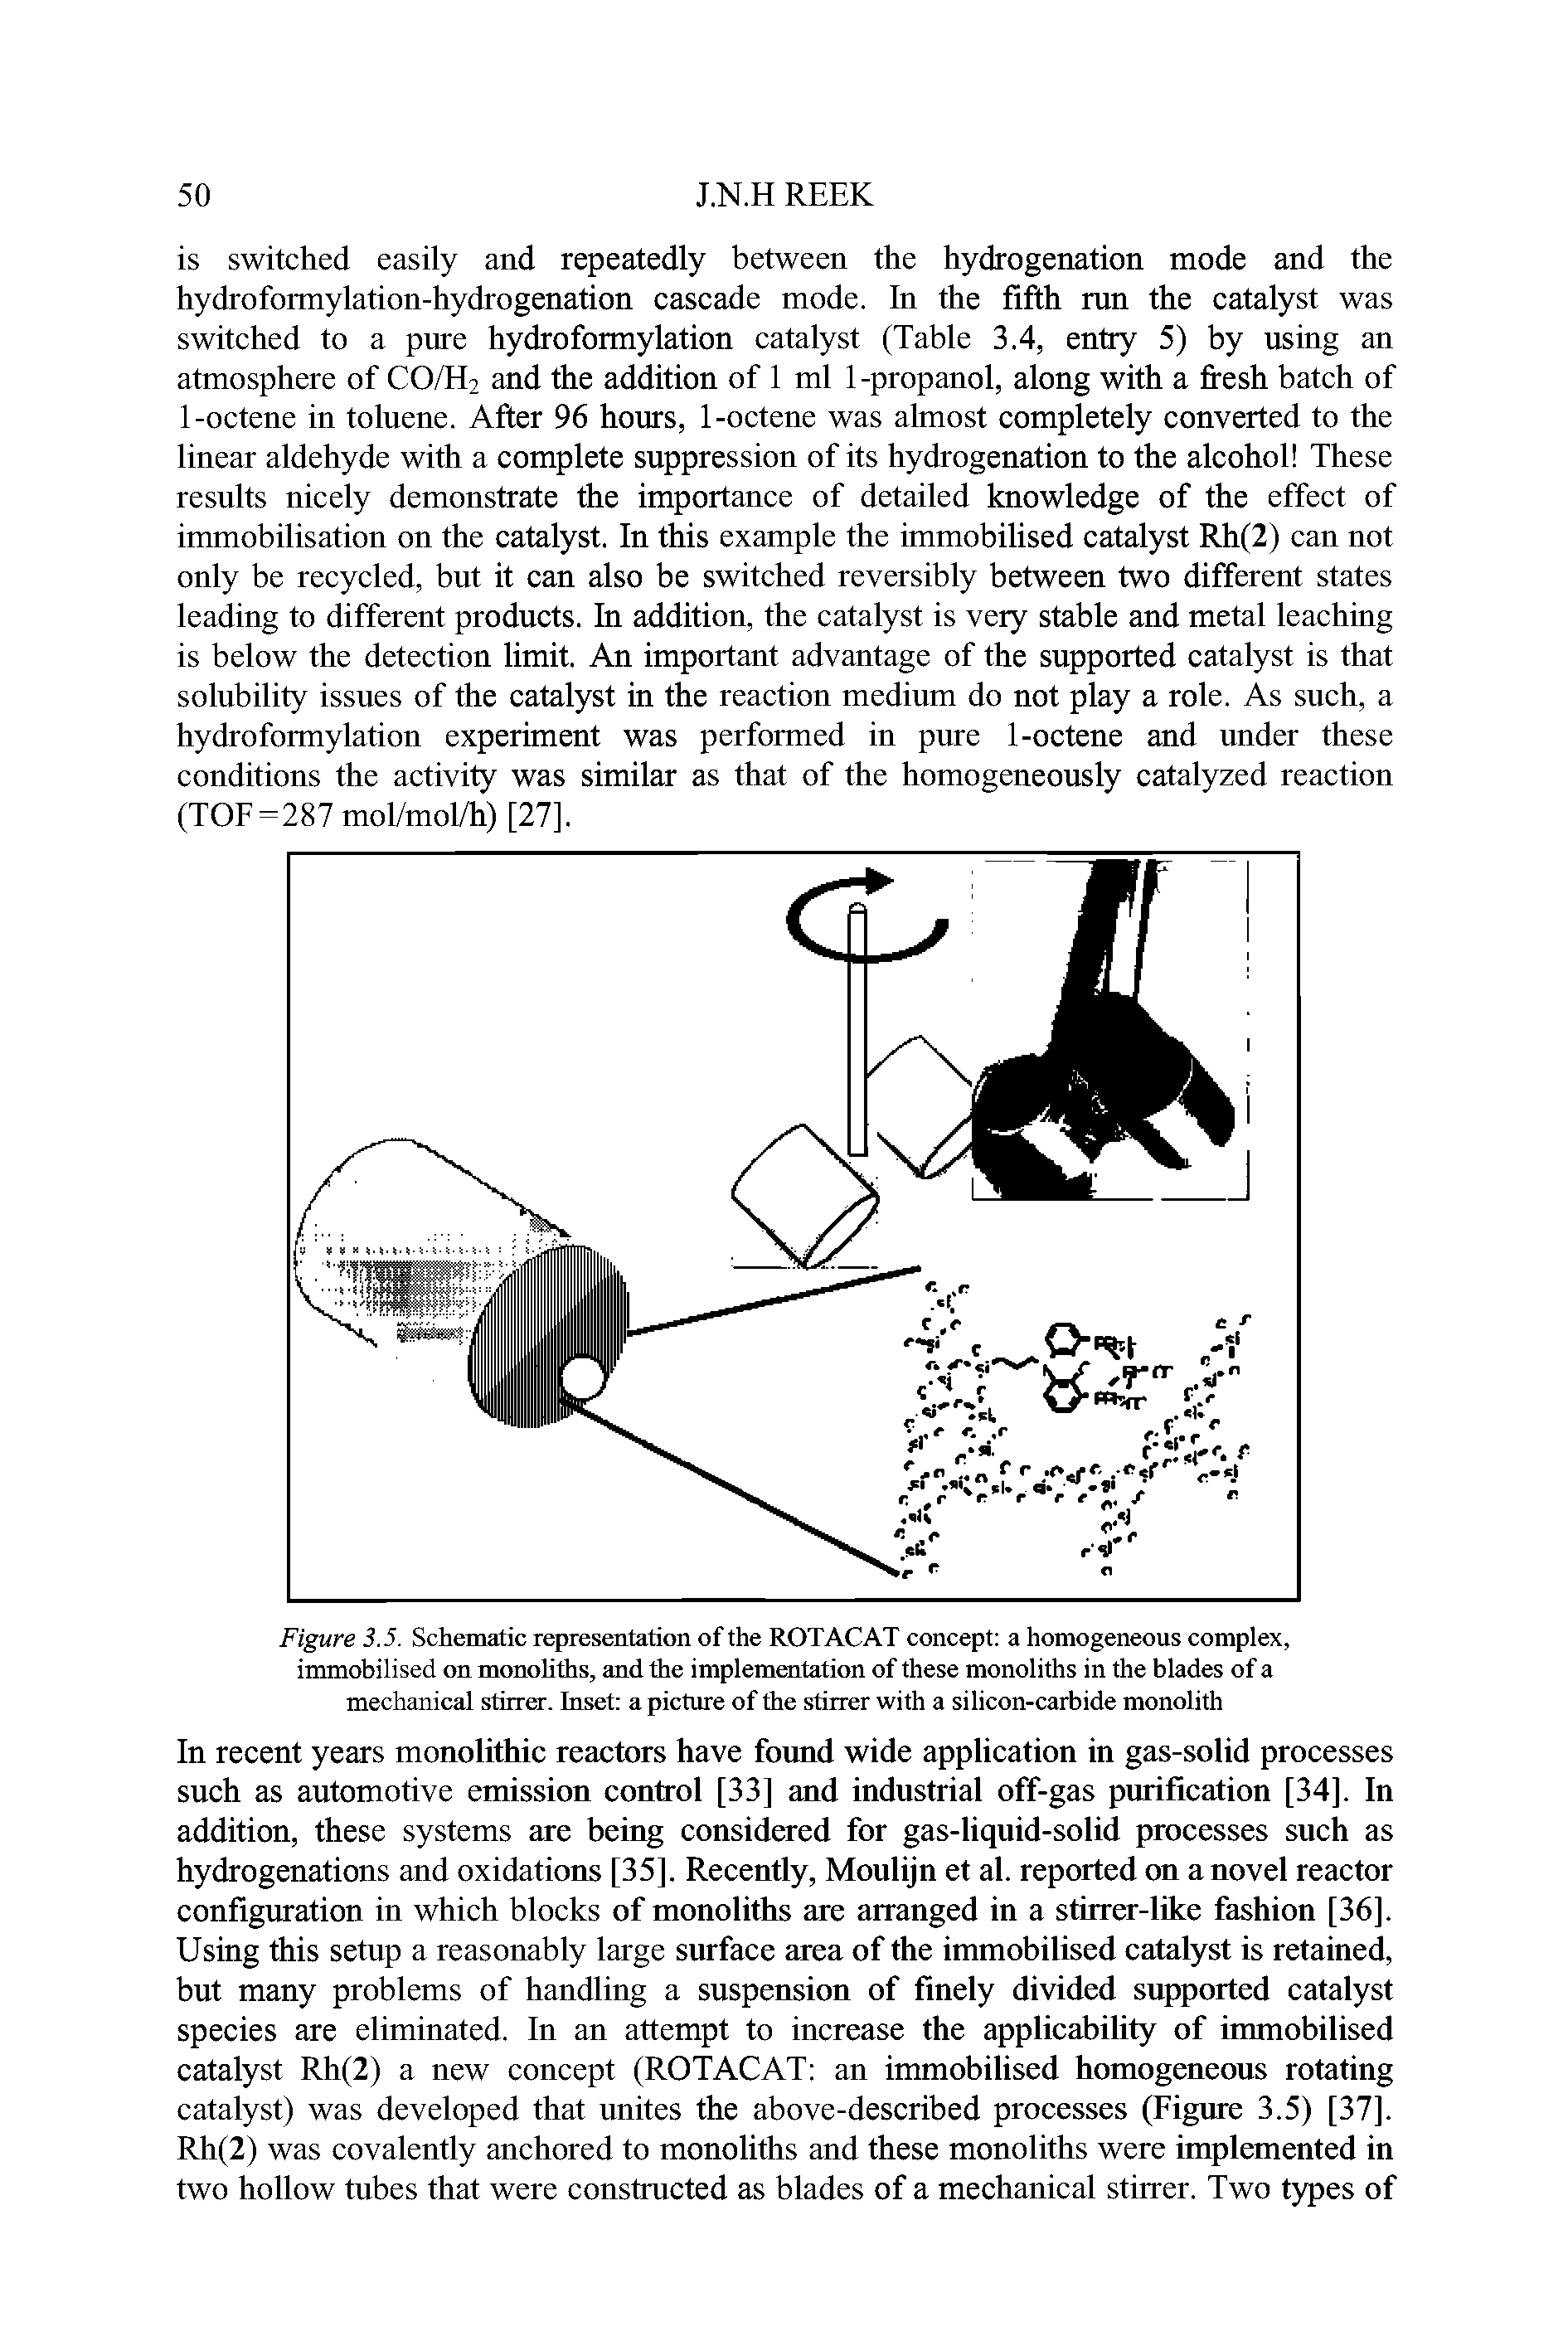 Figure 3.5. Schematic representation of the ROTACAT concept a homogeneous complex, immobilised on monoliths, and the implementation of these monoliths in the blades of a mechanical stirrer. Inset a picture of the stirrer with a silicon-carbide monolith...